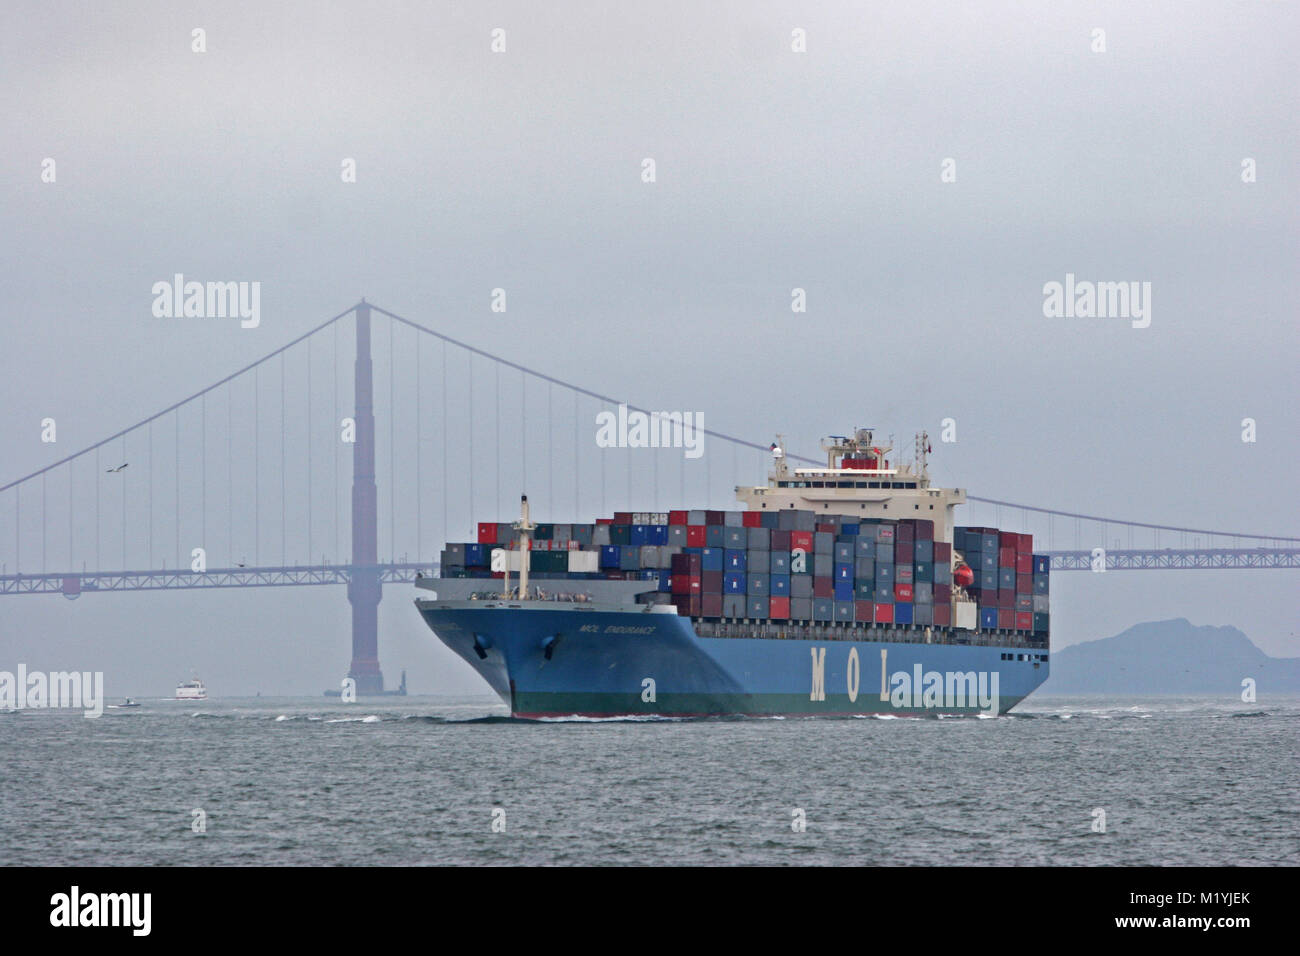 Ship loaded with containers enters bay under Golden Gate Bridge in San Francisco California Stock Photo